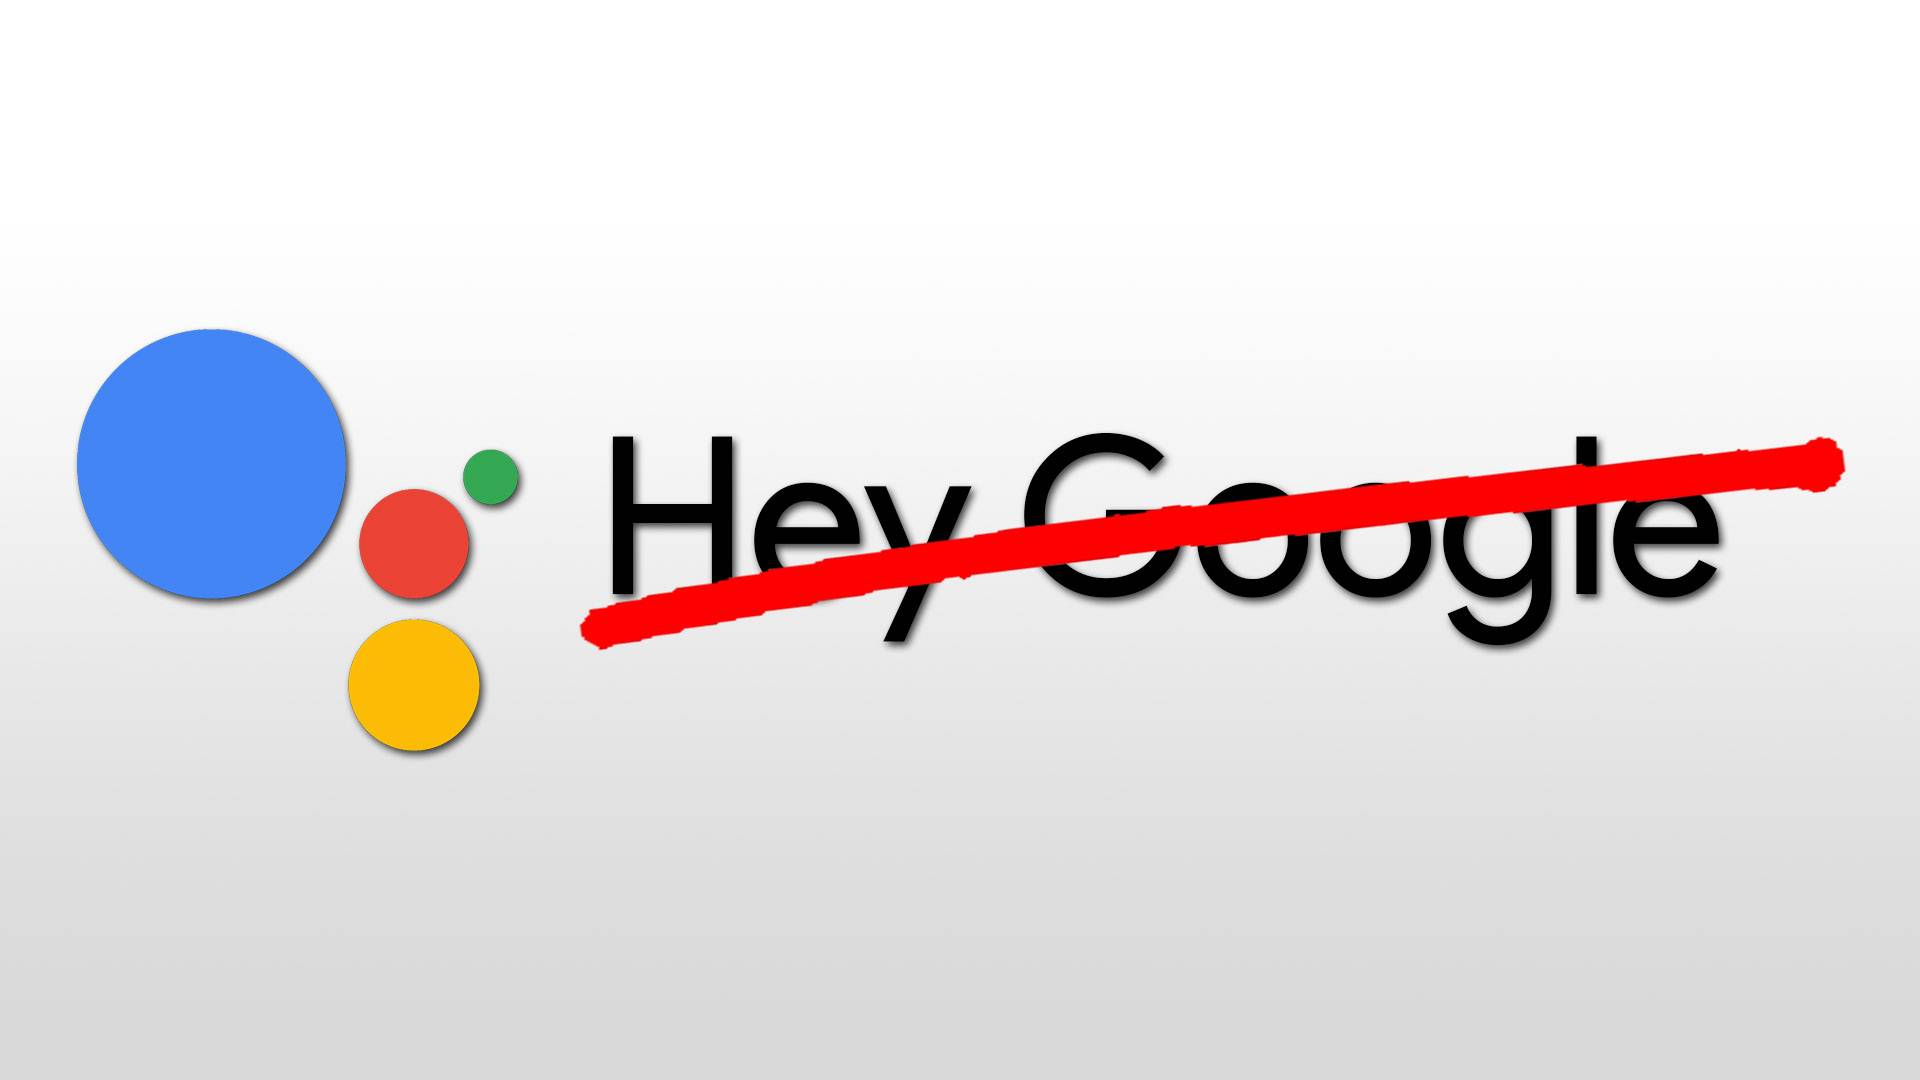 Google finally recognizes 'Hey Google' and meetings don't go well together